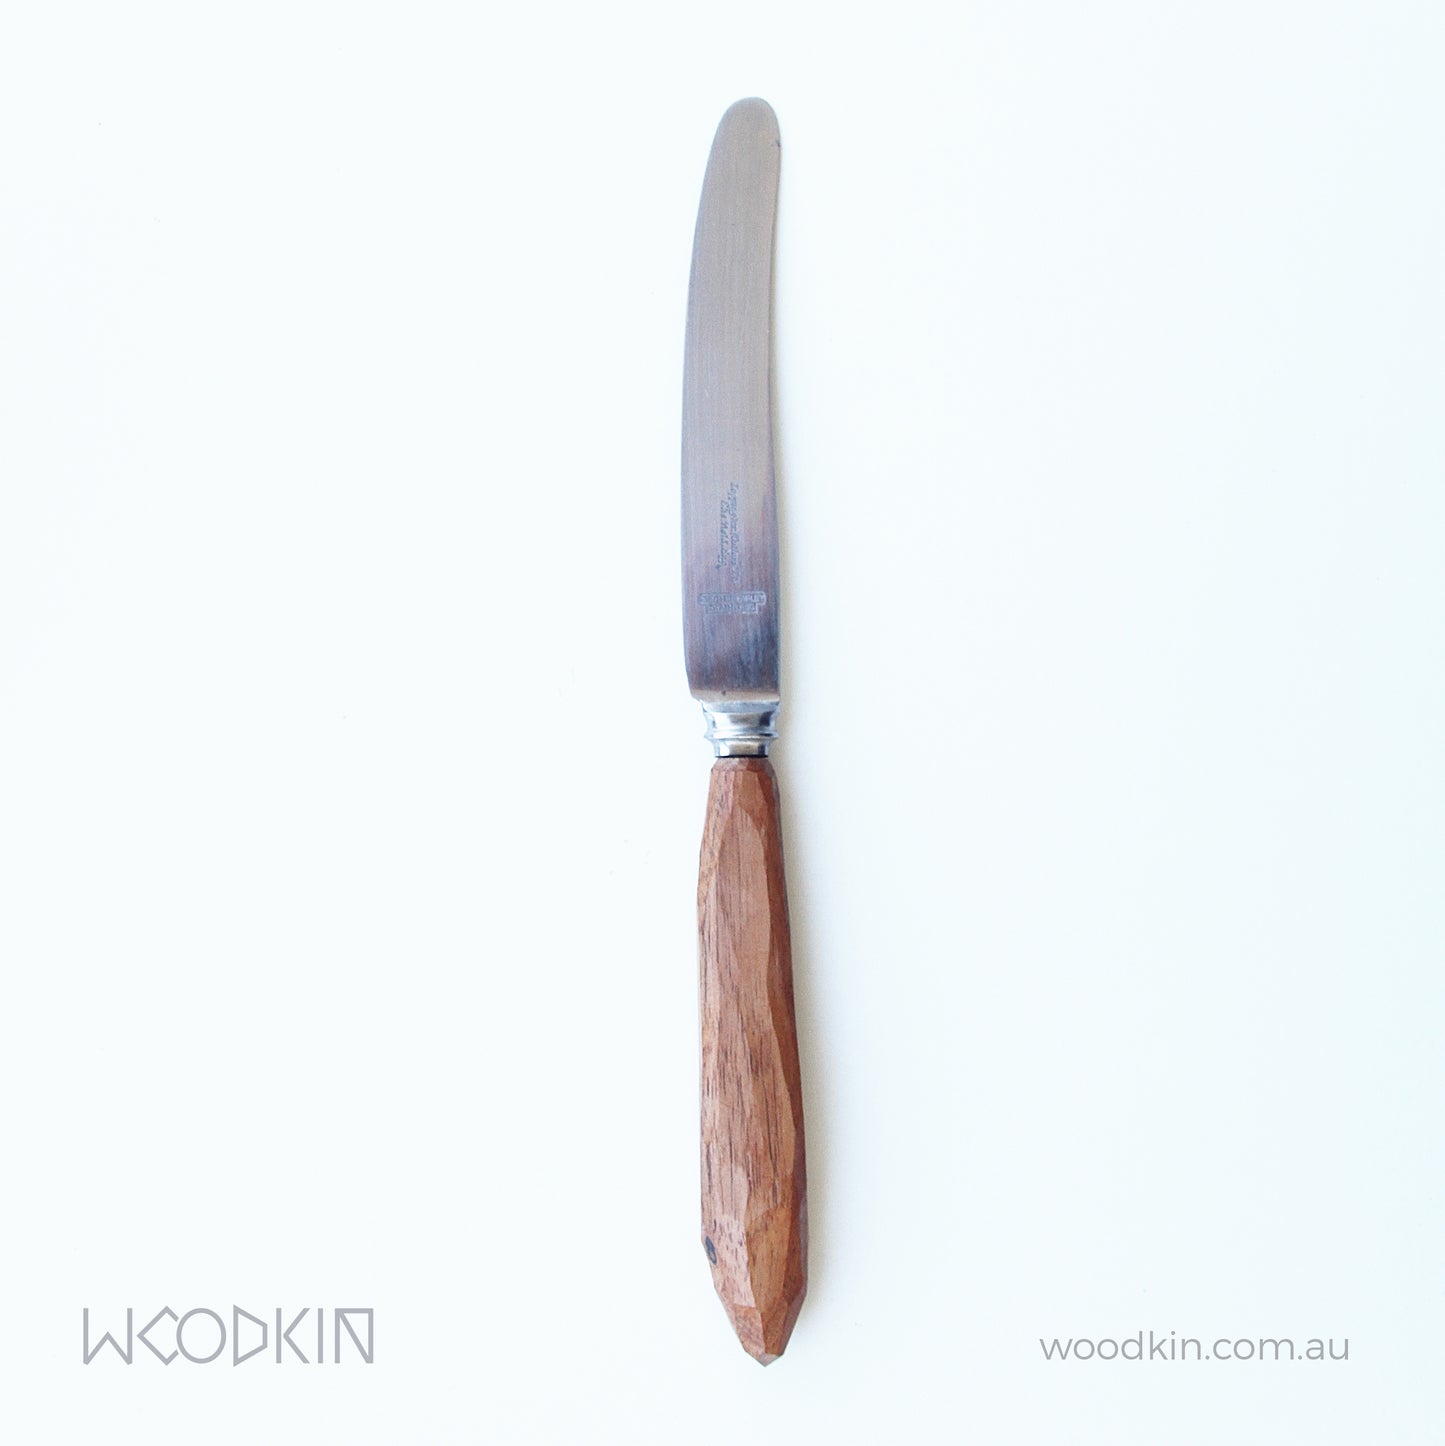 Wooden handled vintage cheese knife